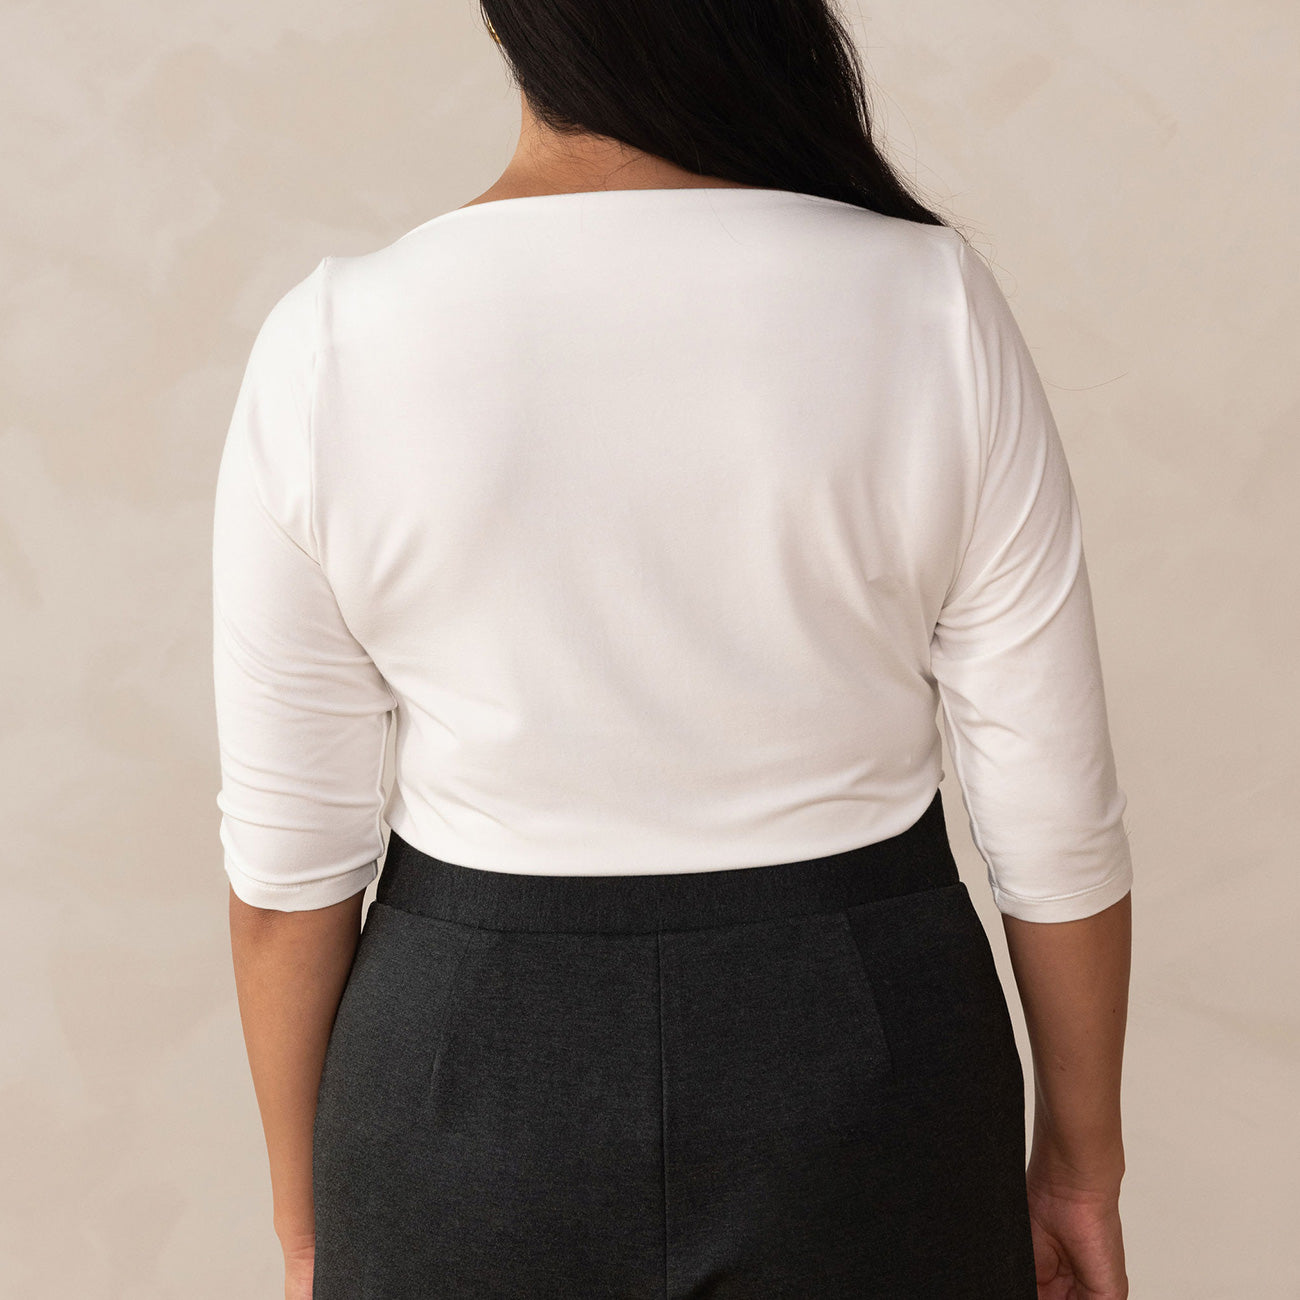 back of woman wearing a white 3/4 sleeve top